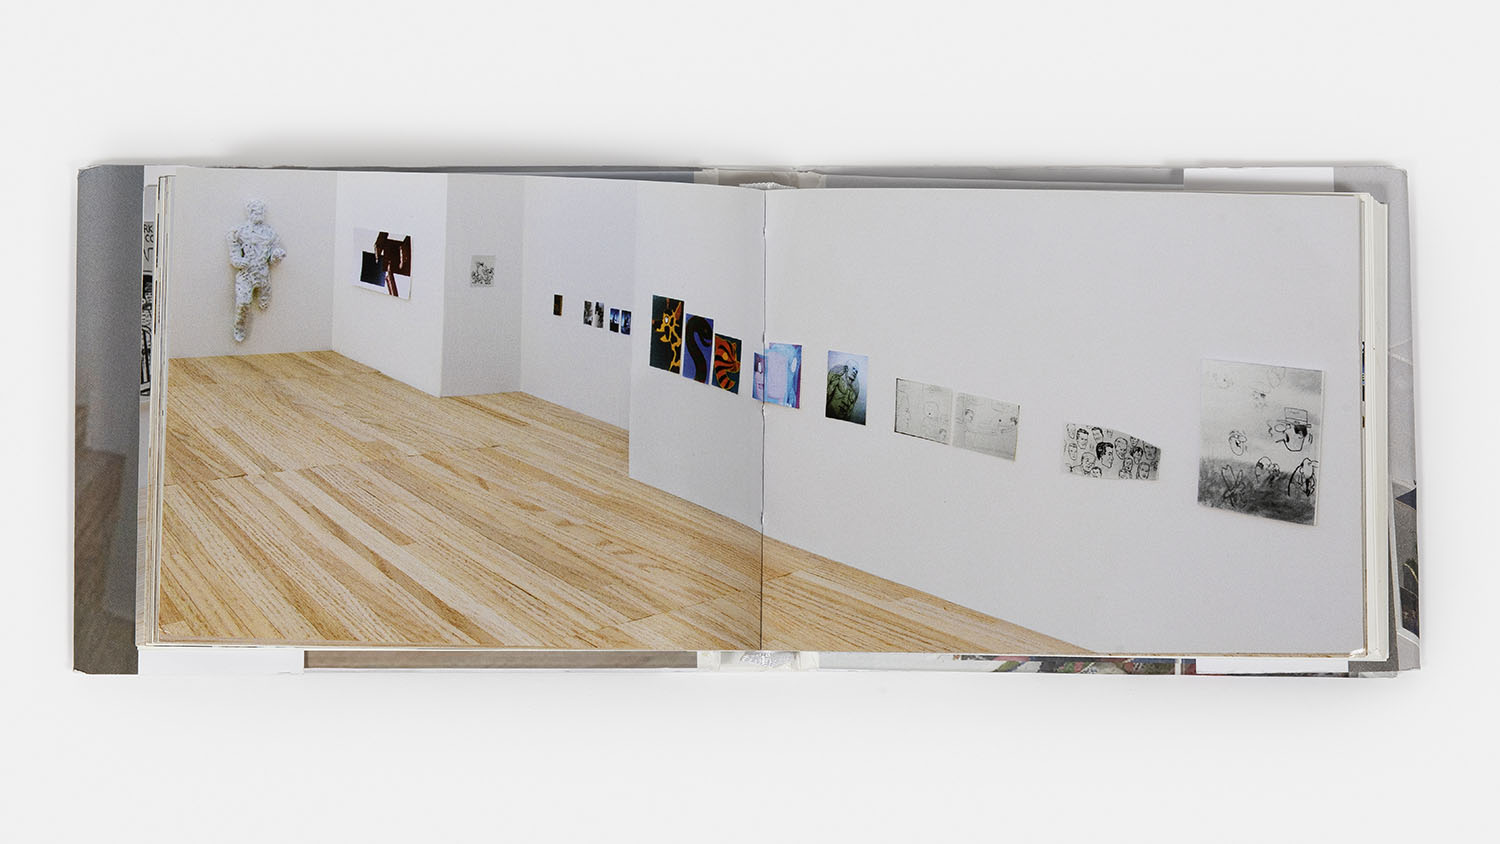 Dream Object Book, 2011 - Additional view